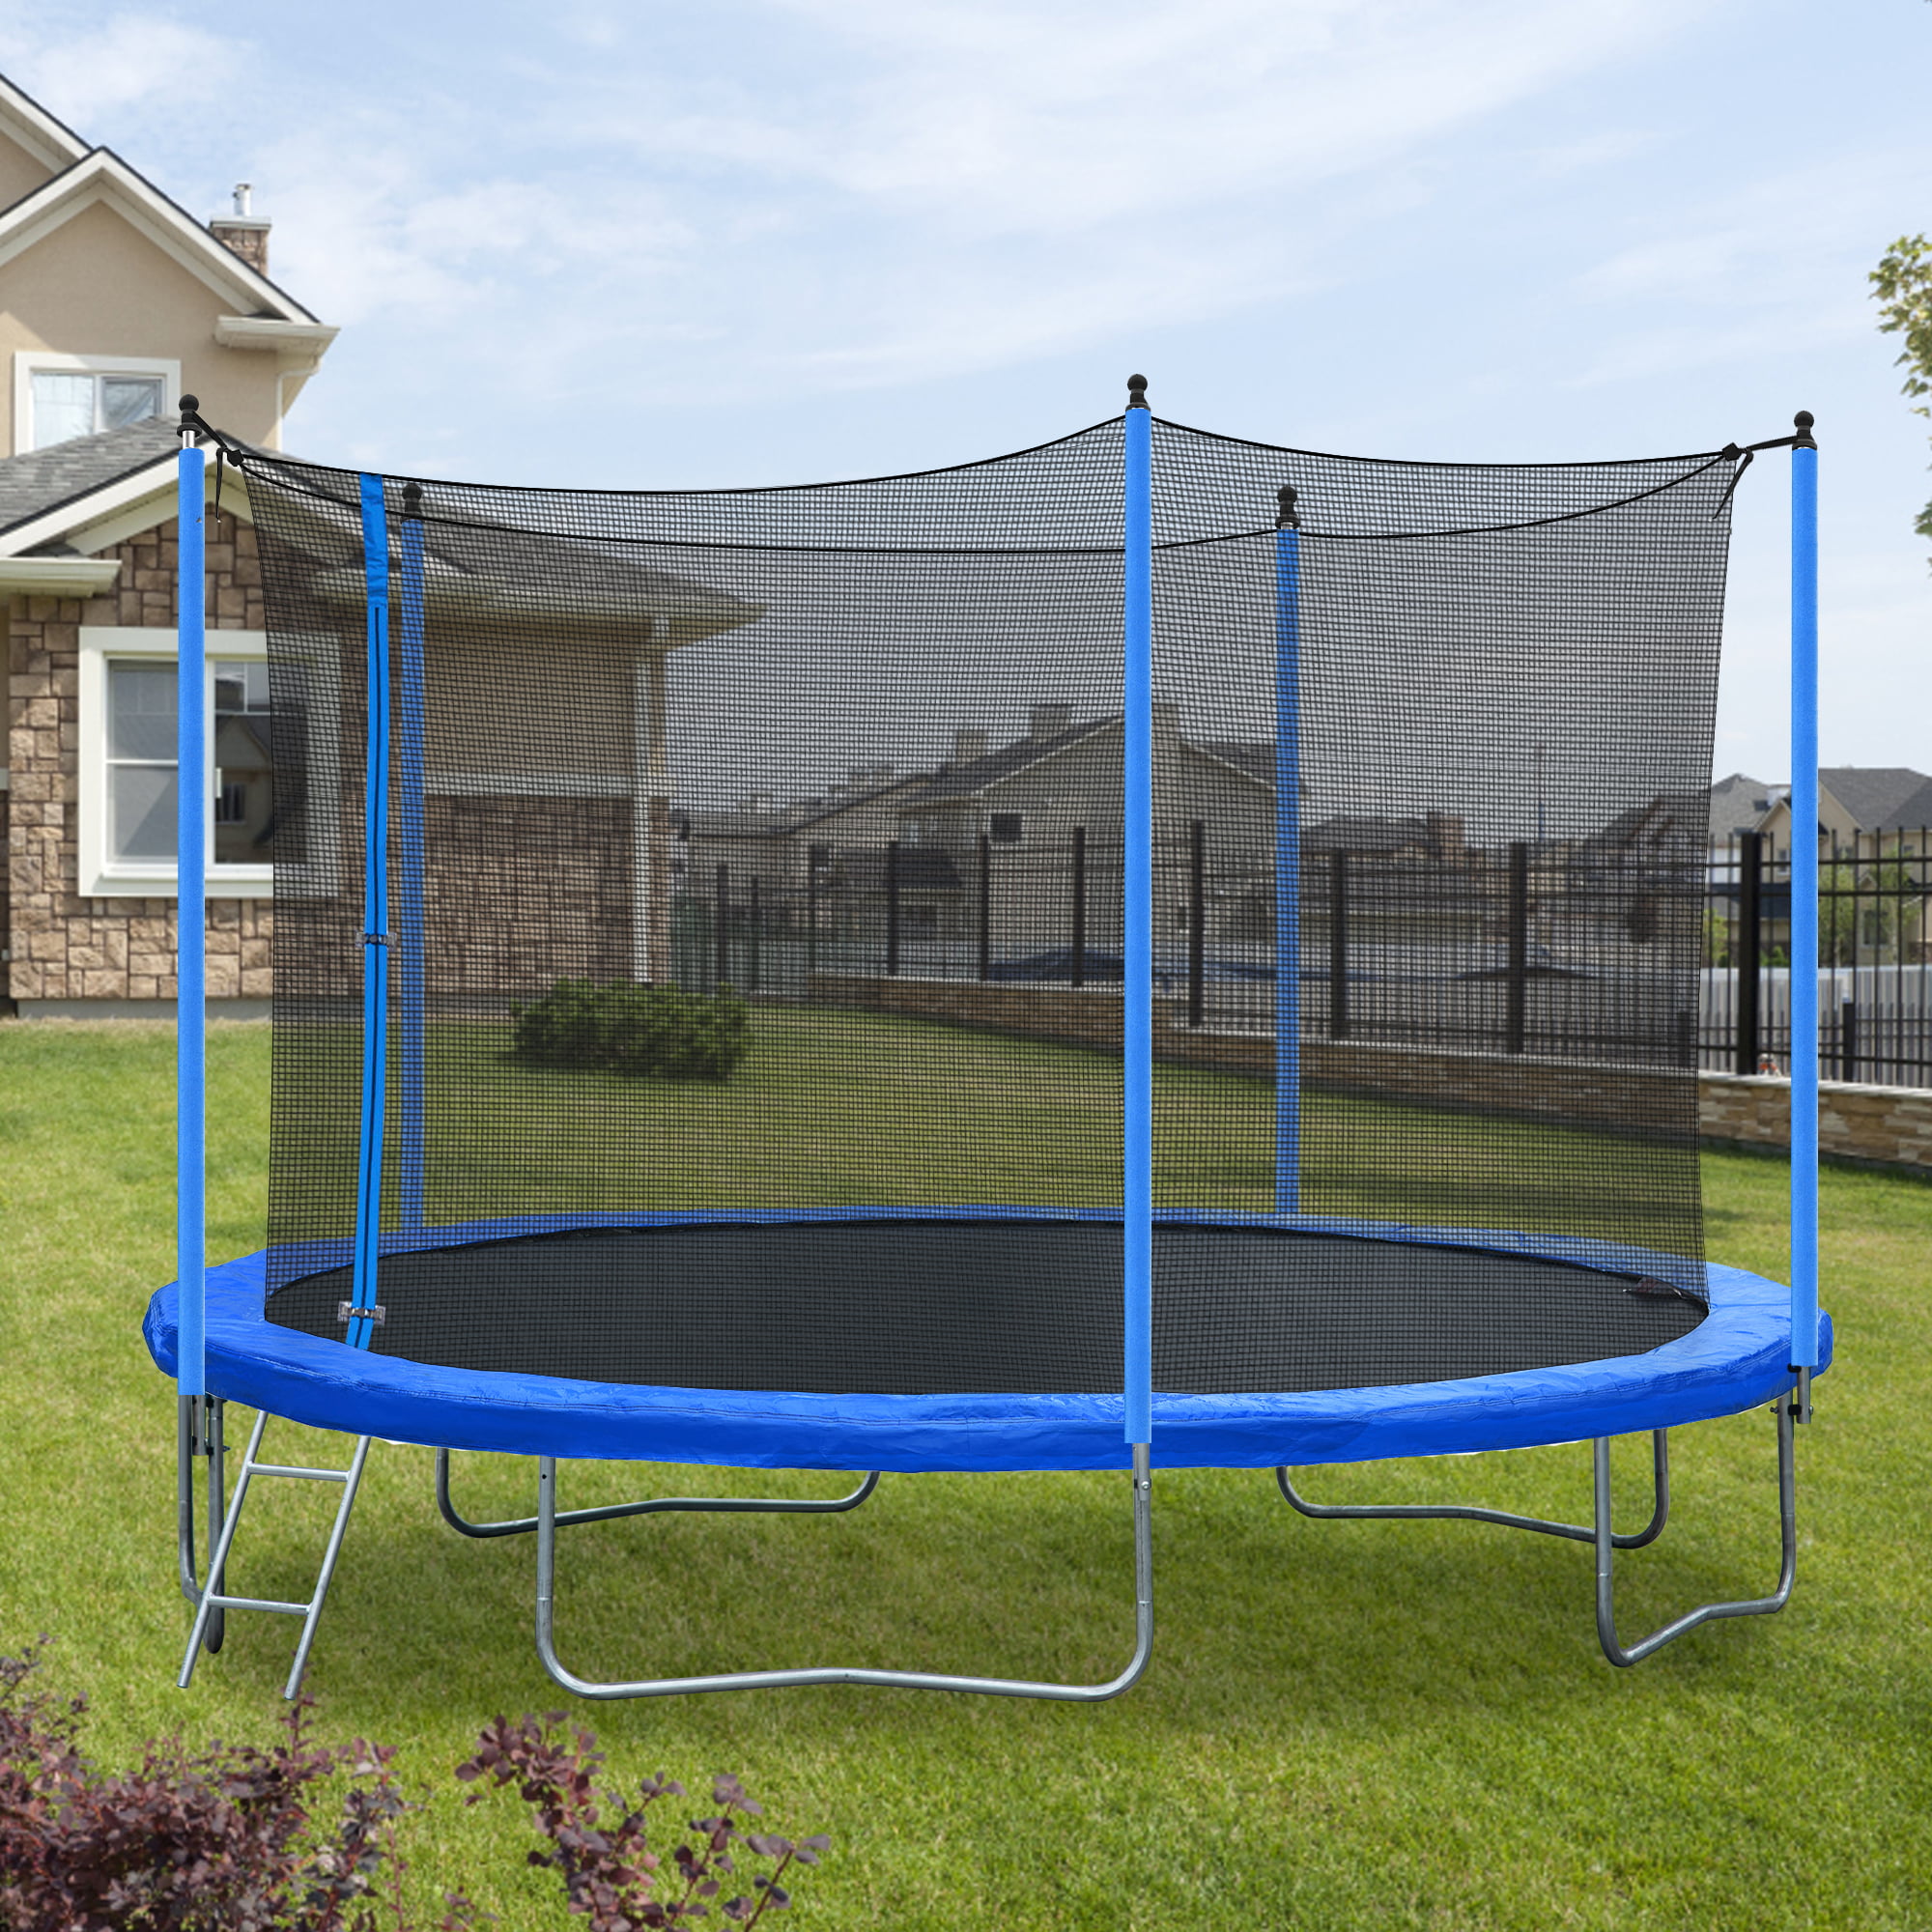 Euroco 12FT Trampoline for Kids, Solid Trampoline with Enclosure and Ladder for Adults and 4-5 Kids, Outdoor Recreation Trampoline, High Duty Safety - image 4 of 10